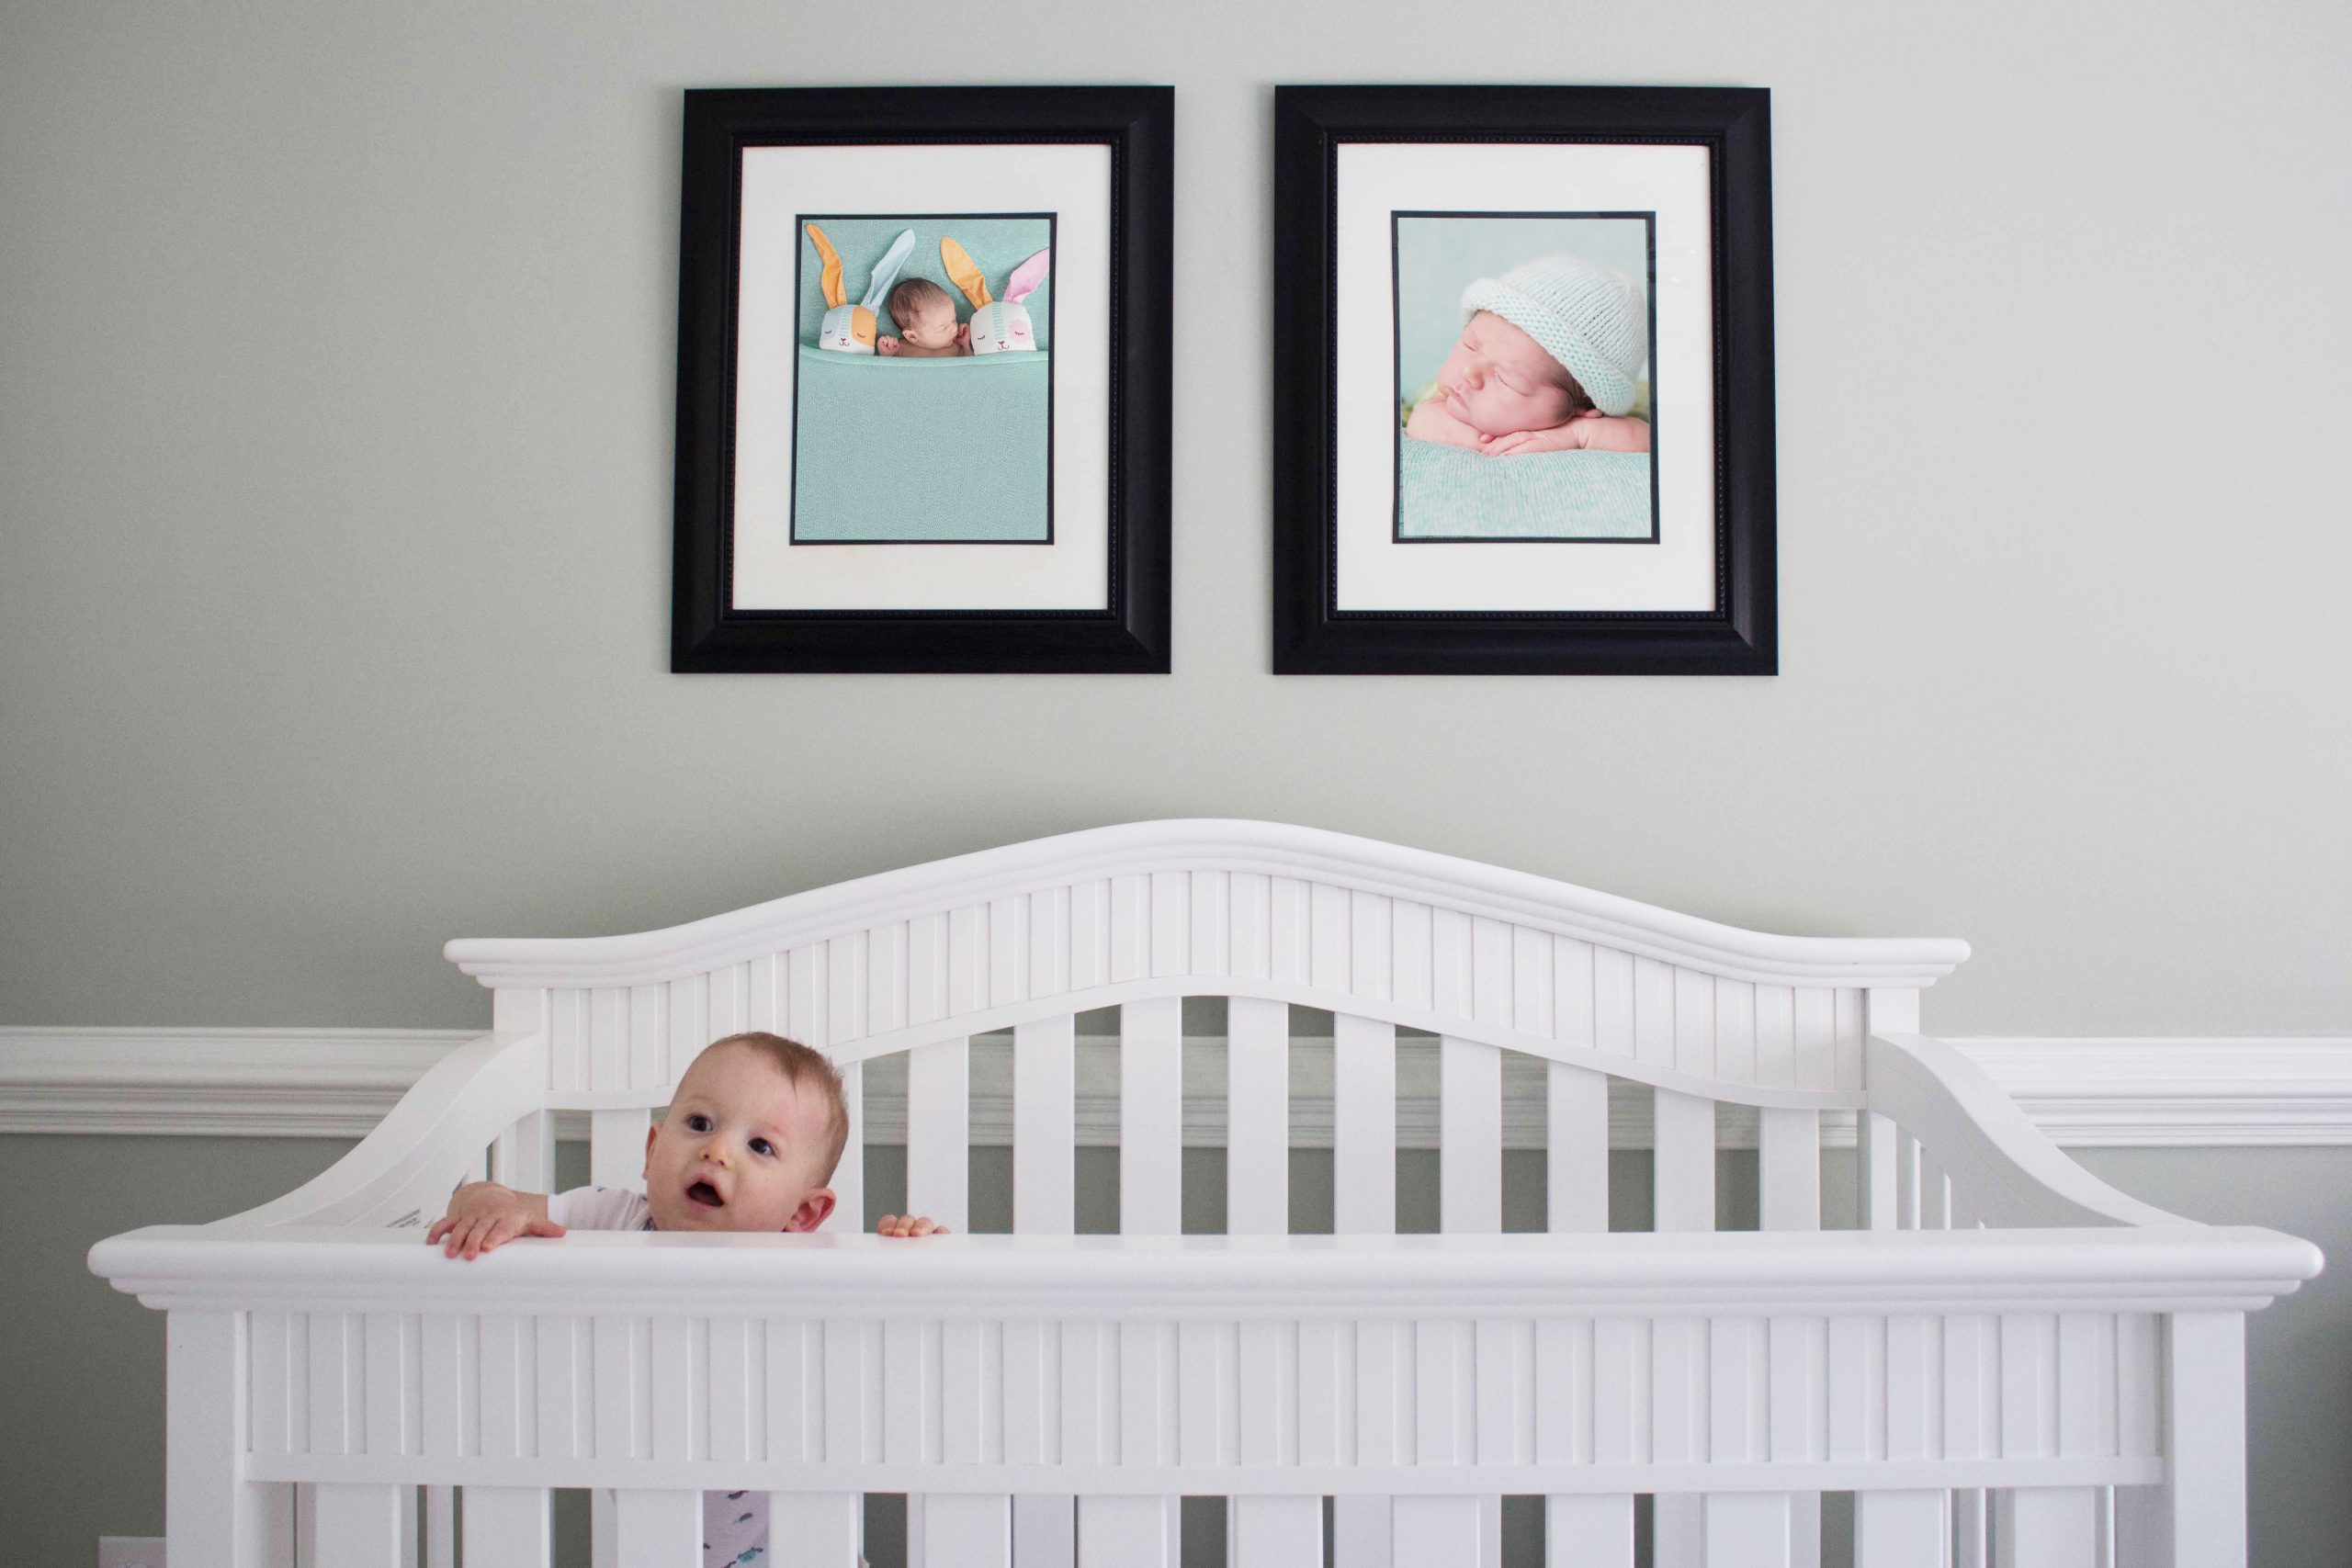 Lifestyle picture of a baby in a crib in front of studio newborn pictures on the wall